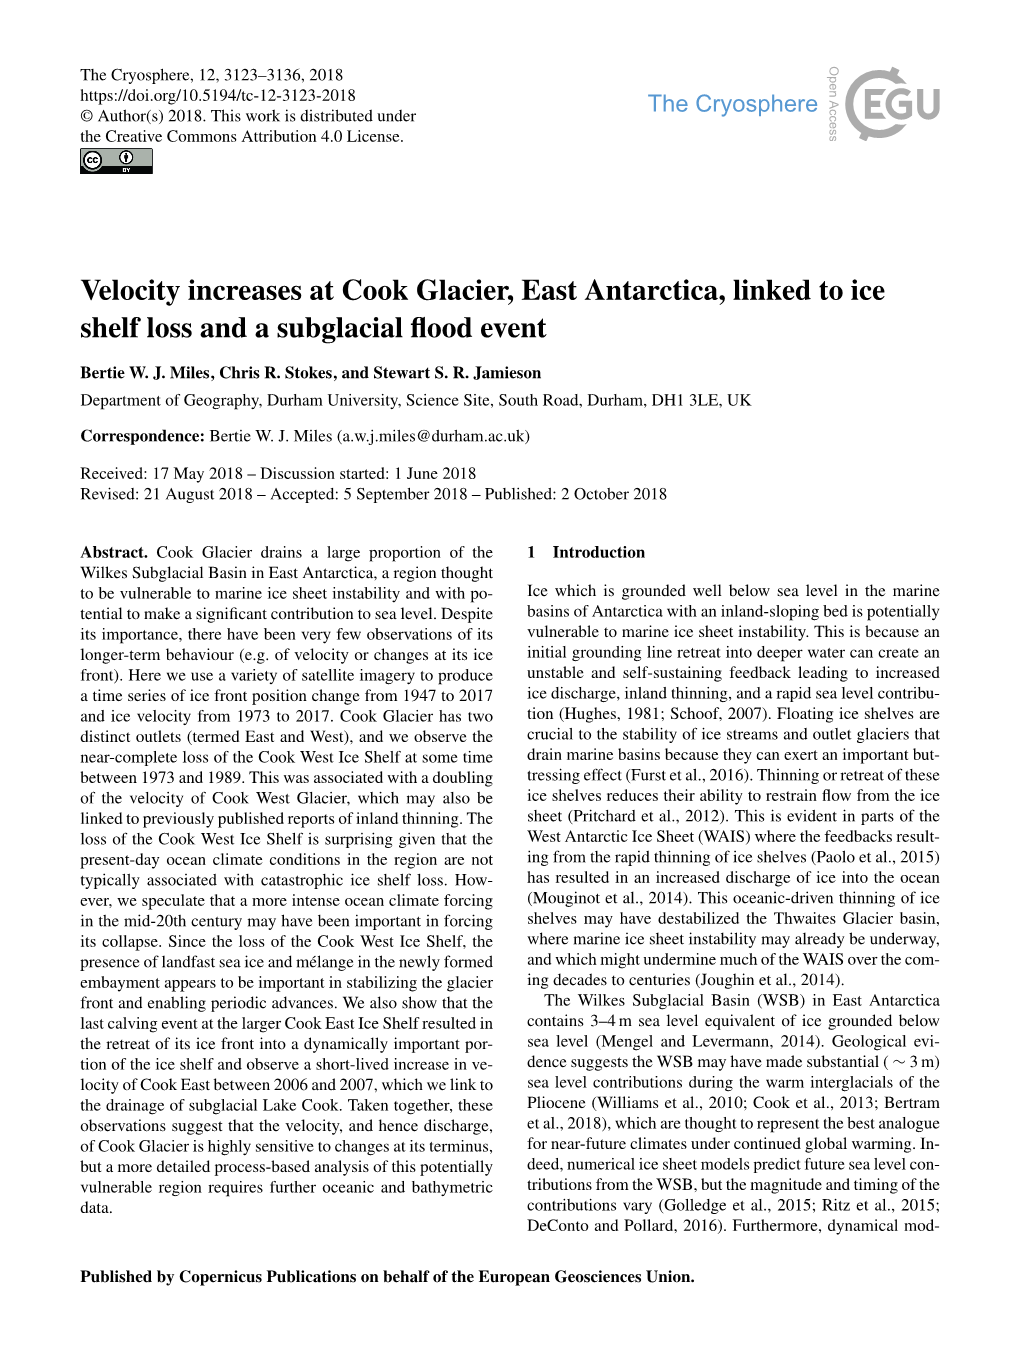 Velocity Increases at Cook Glacier, East Antarctica, Linked to Ice Shelf Loss and a Subglacial ﬂood Event